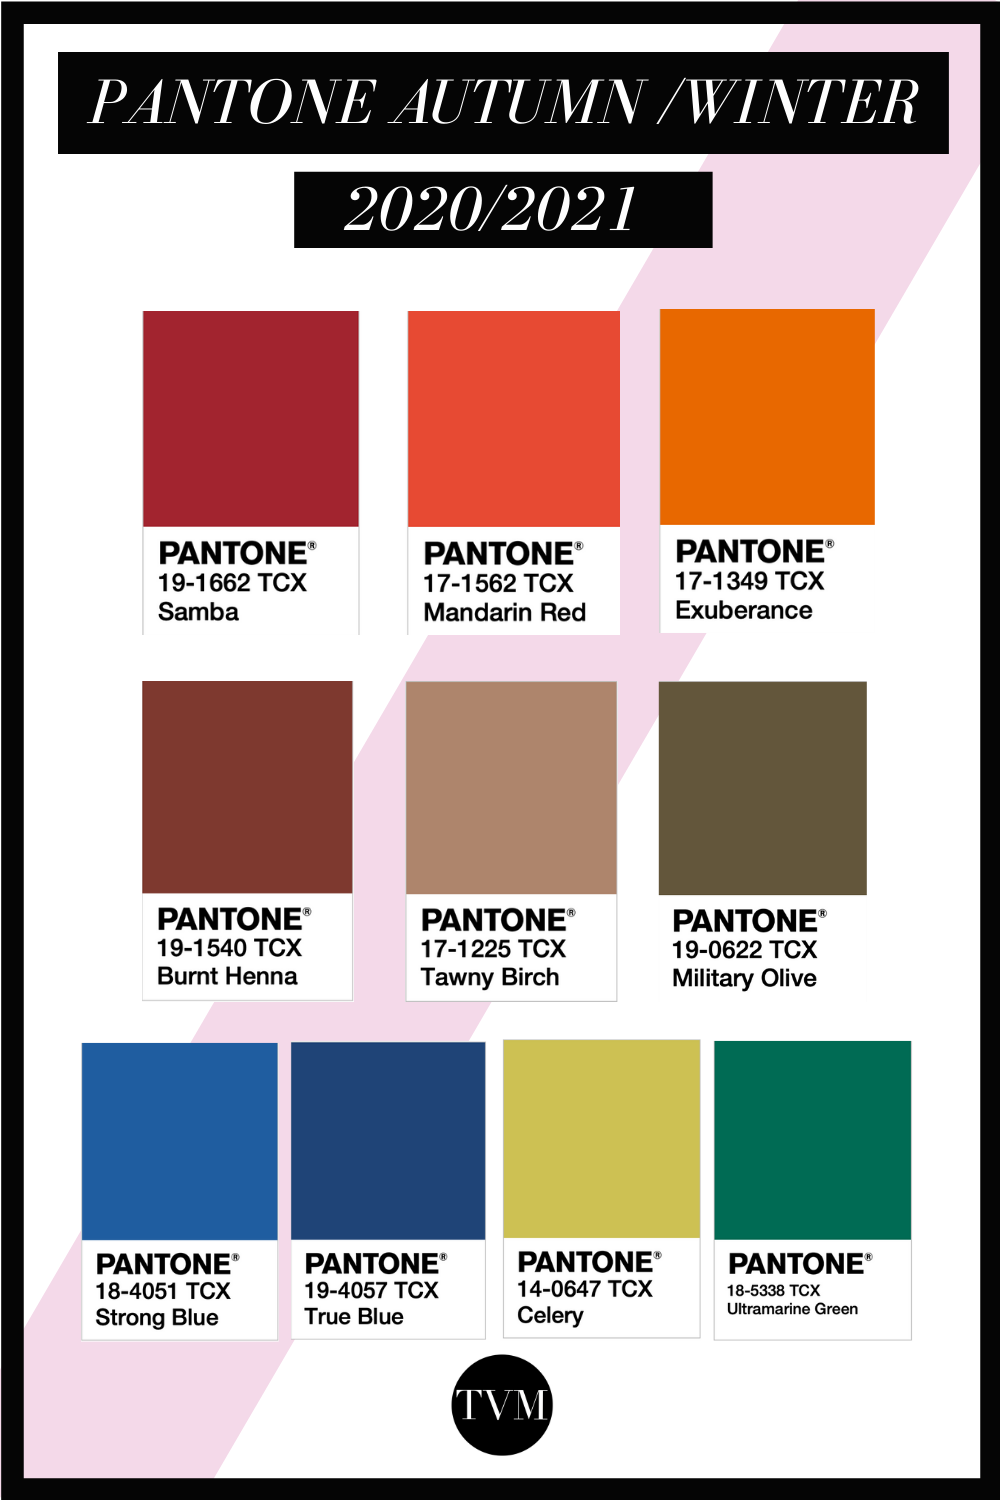 THE 10 COLOURS OF A/W 2020/2021 THE VANITY MAGAZINE